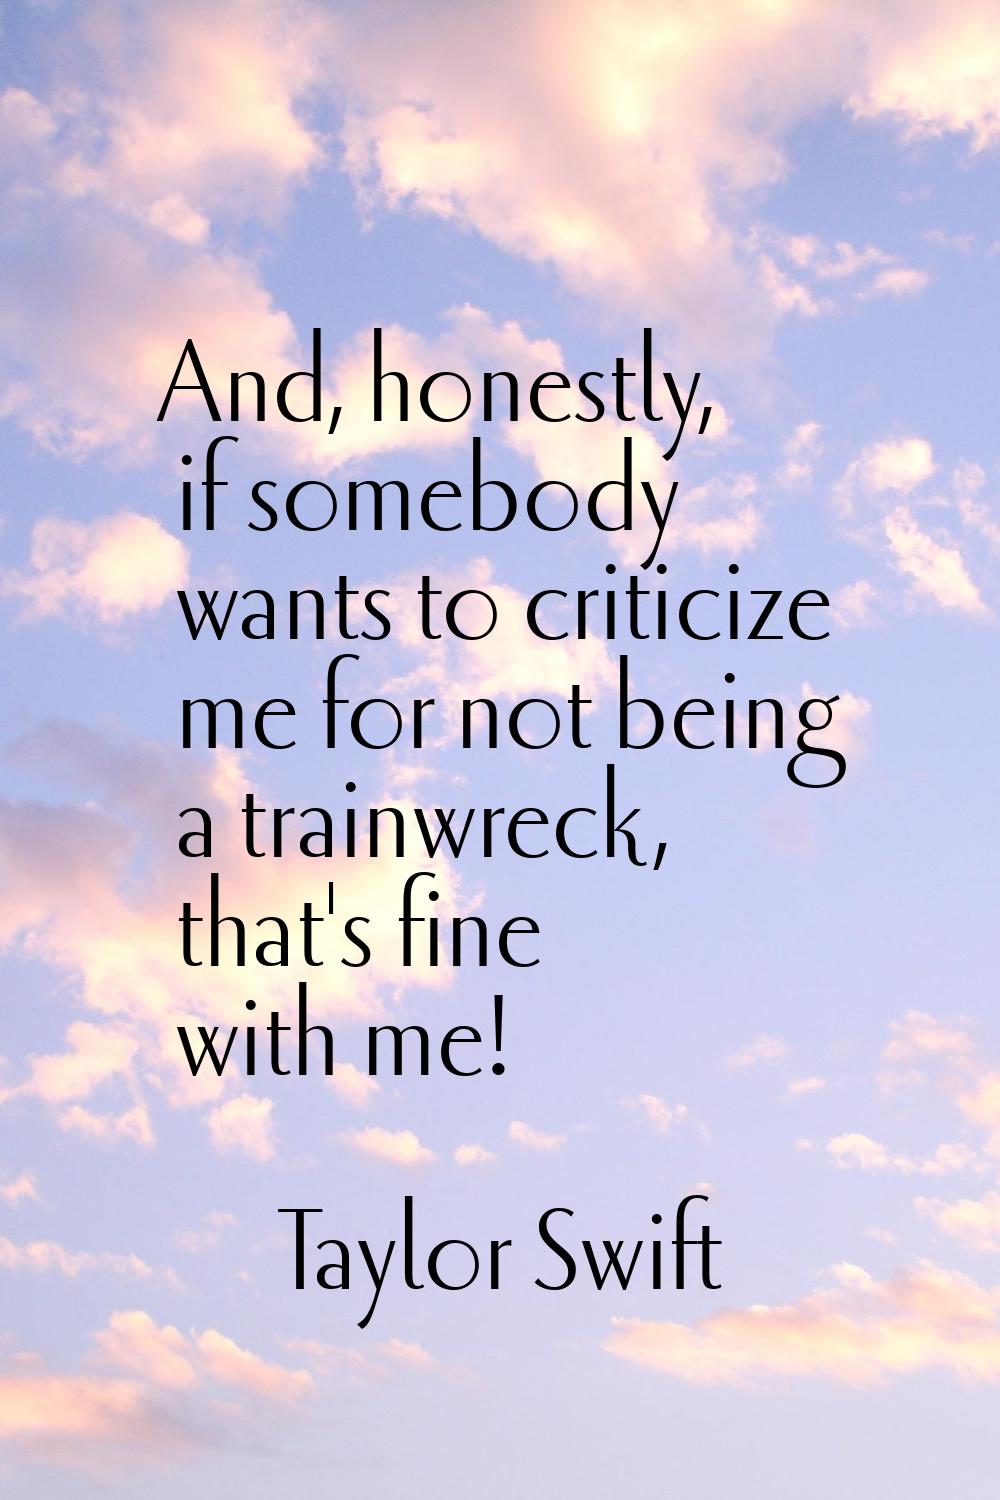 And, honestly, if somebody wants to criticize me for not being a trainwreck, that's fine with me!